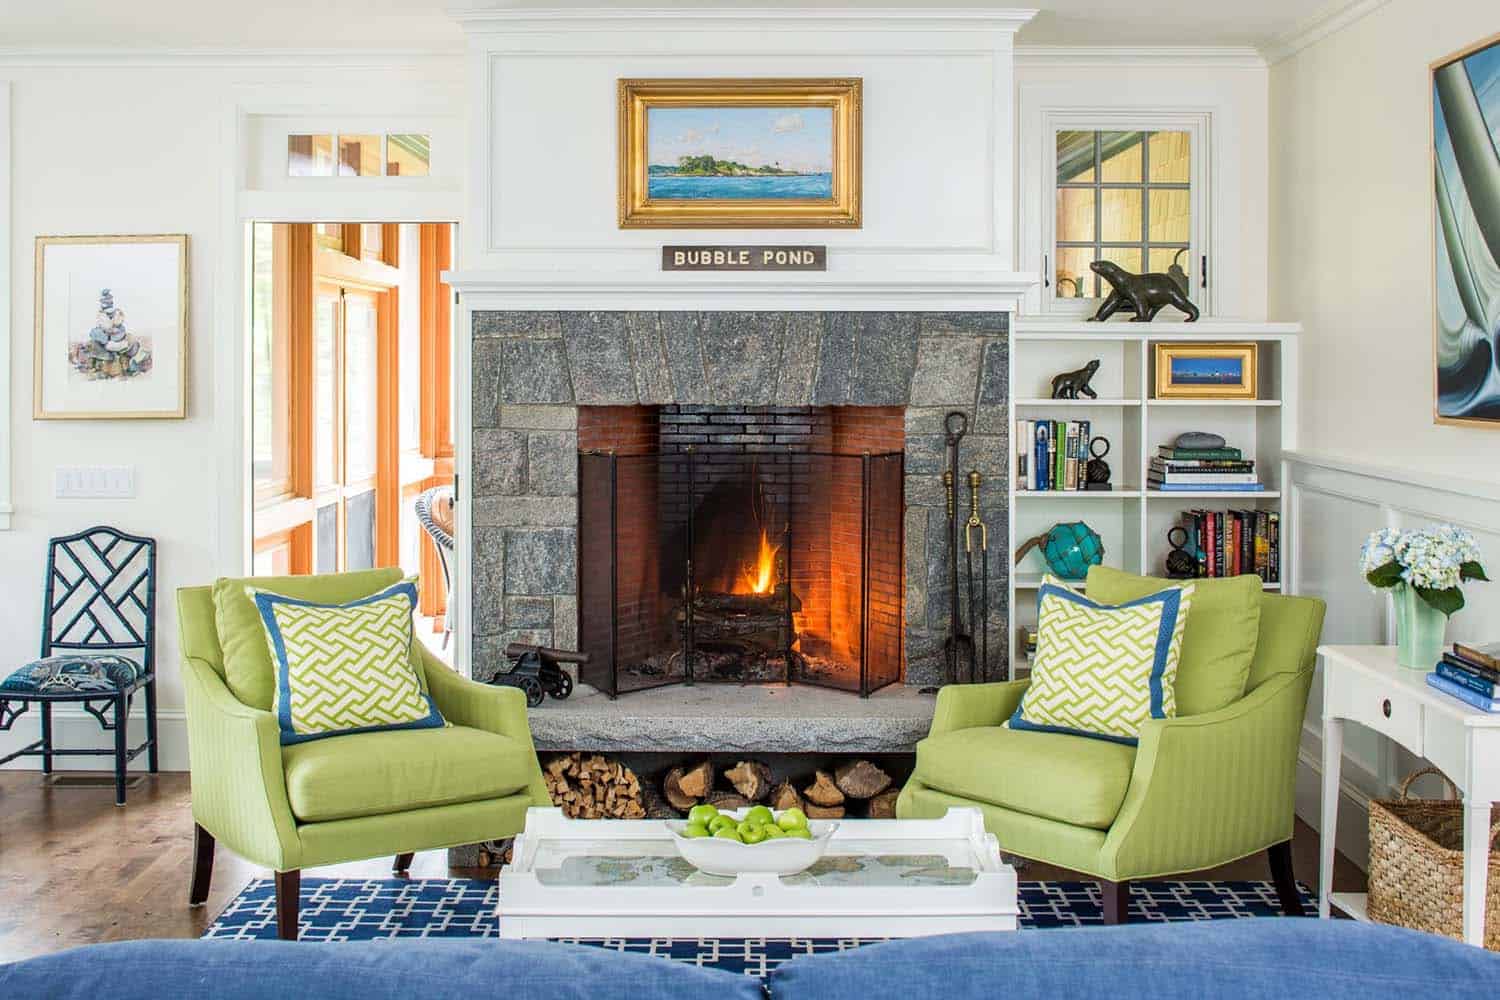 Shingle style cottage in the seaside village of Seal Harbor, Maine